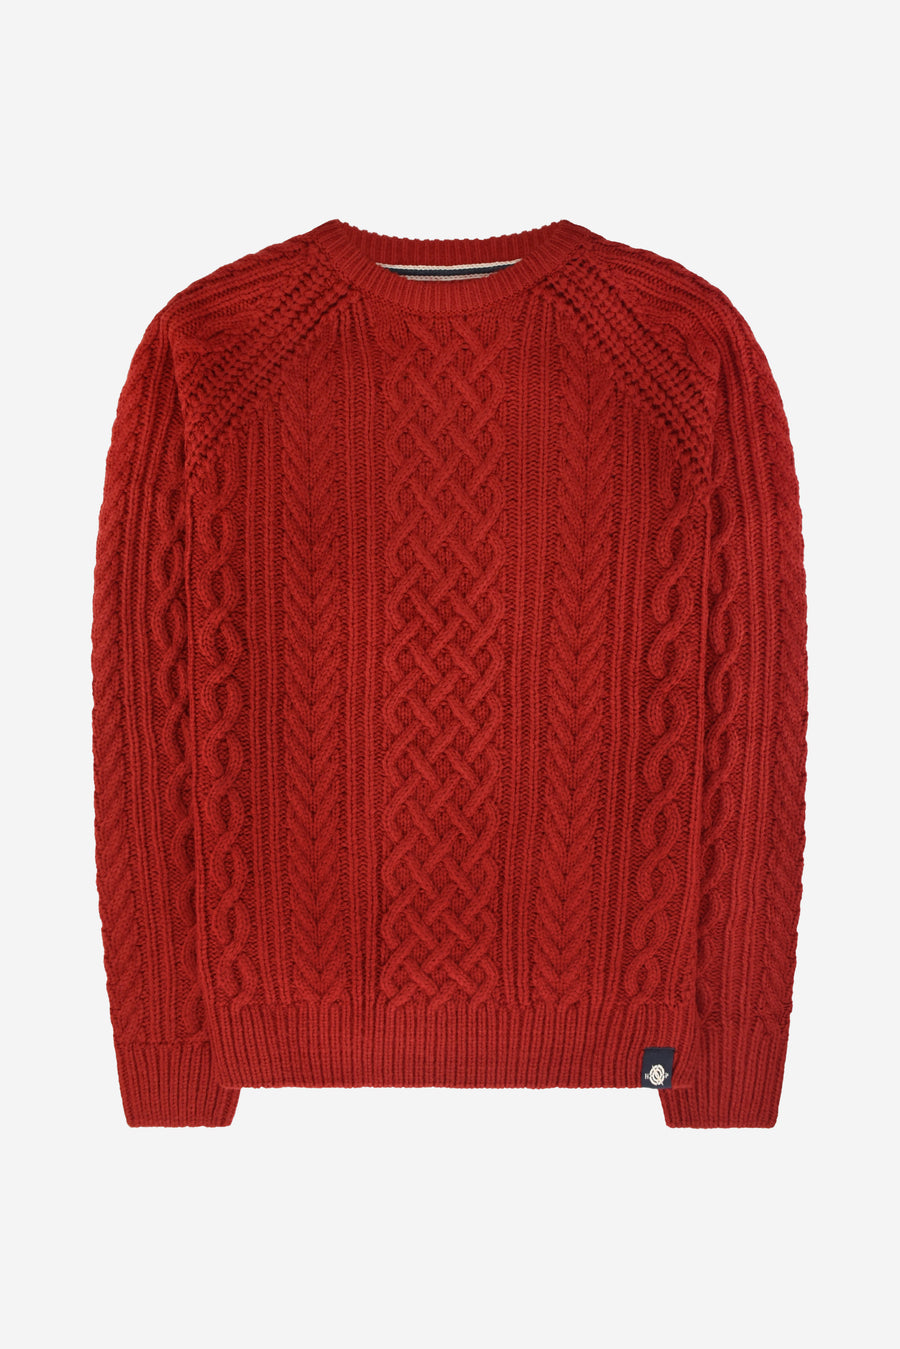 Humble Pioneer - Men's Red Fisherman Cable Knit Jumper